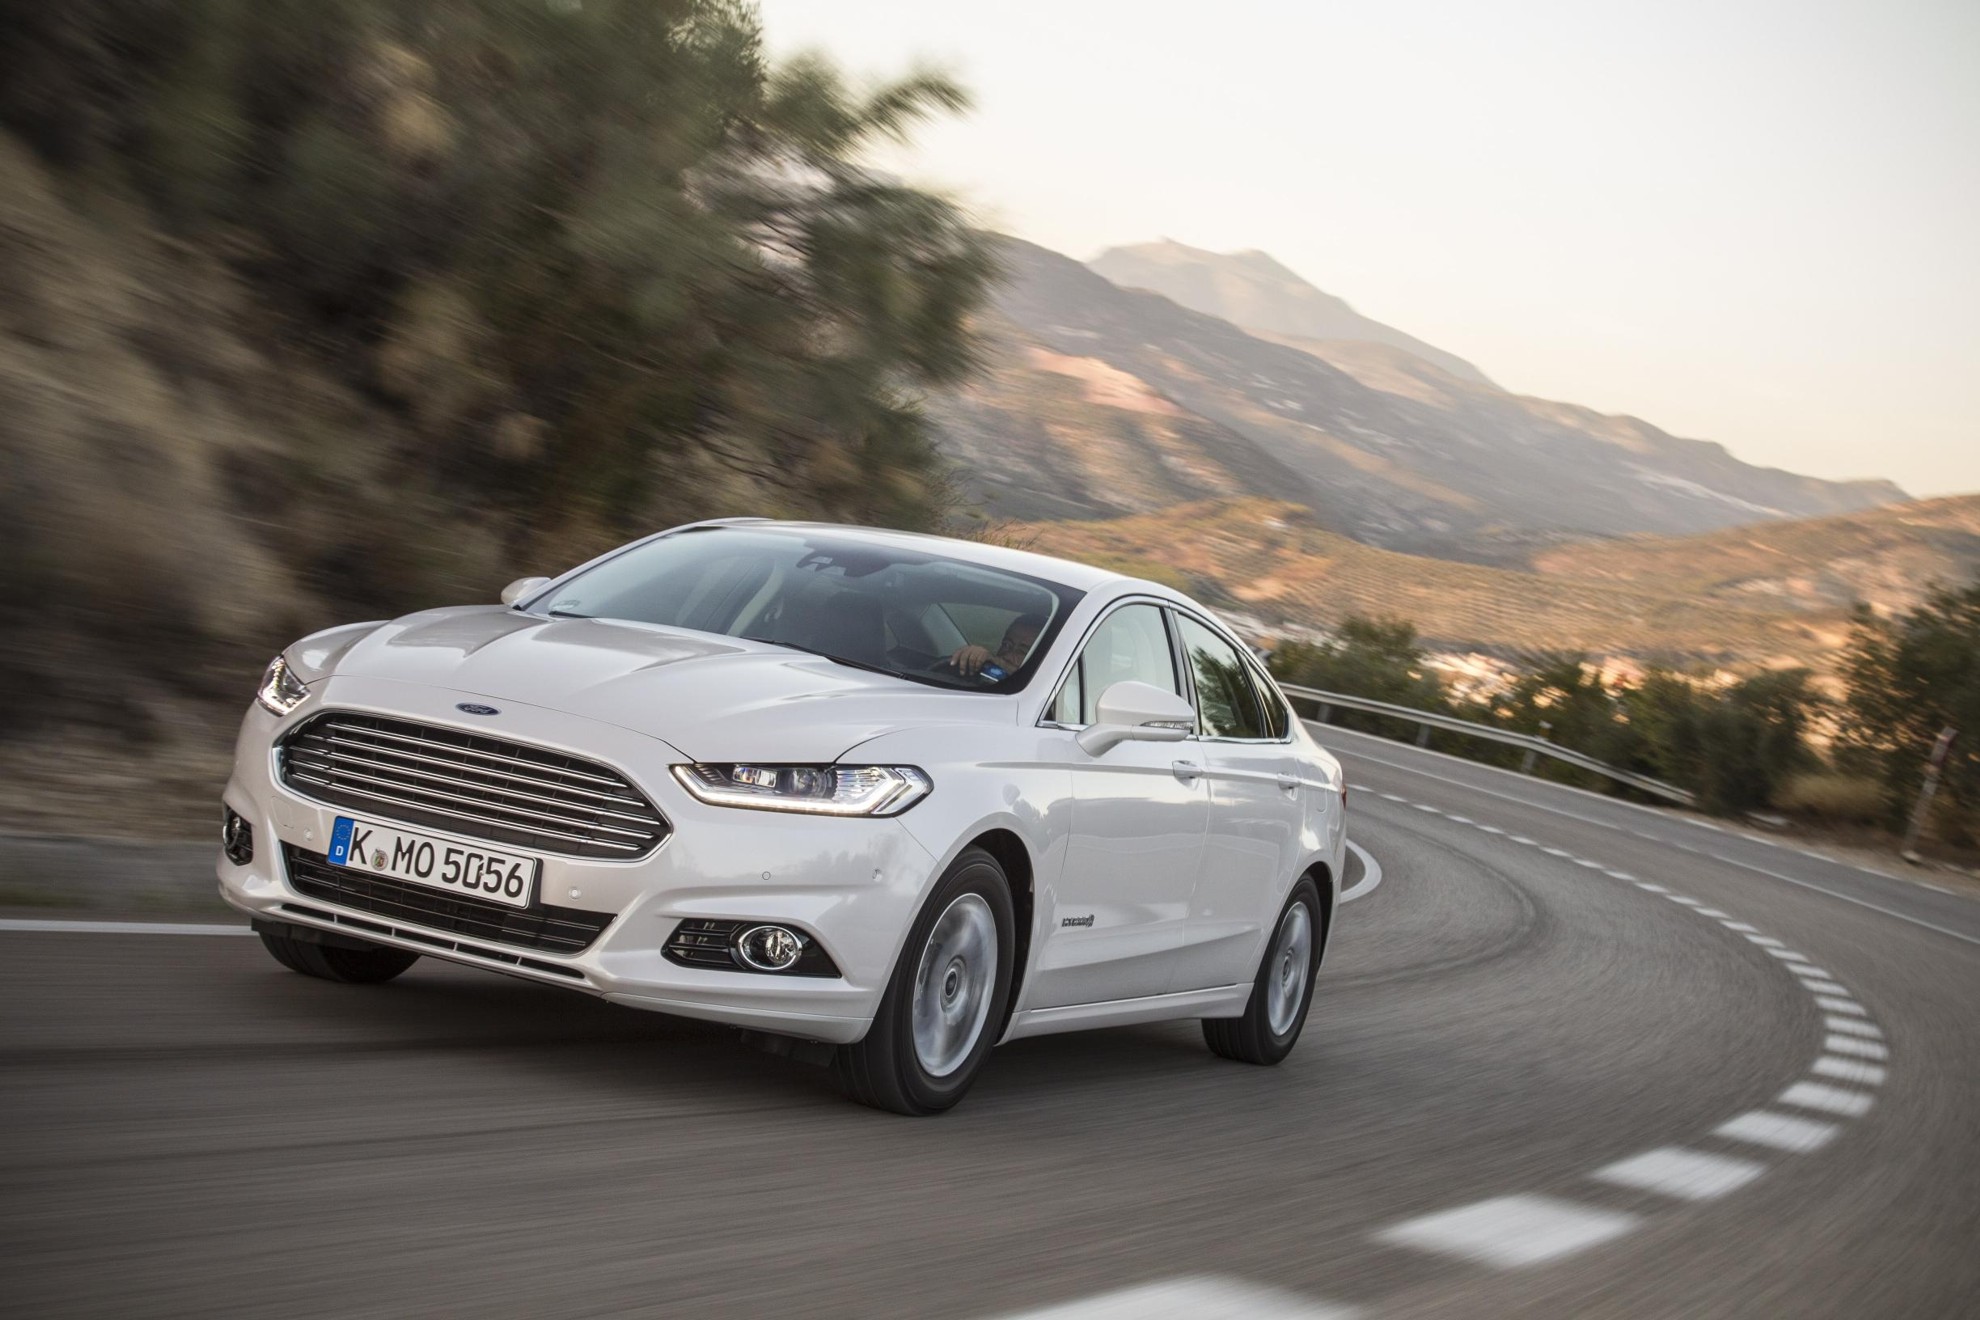 ALL-NEW FORD MONDEO HYBRID IS NEXT GREEN CAR’S LARGE FAMILY CAR WINNER